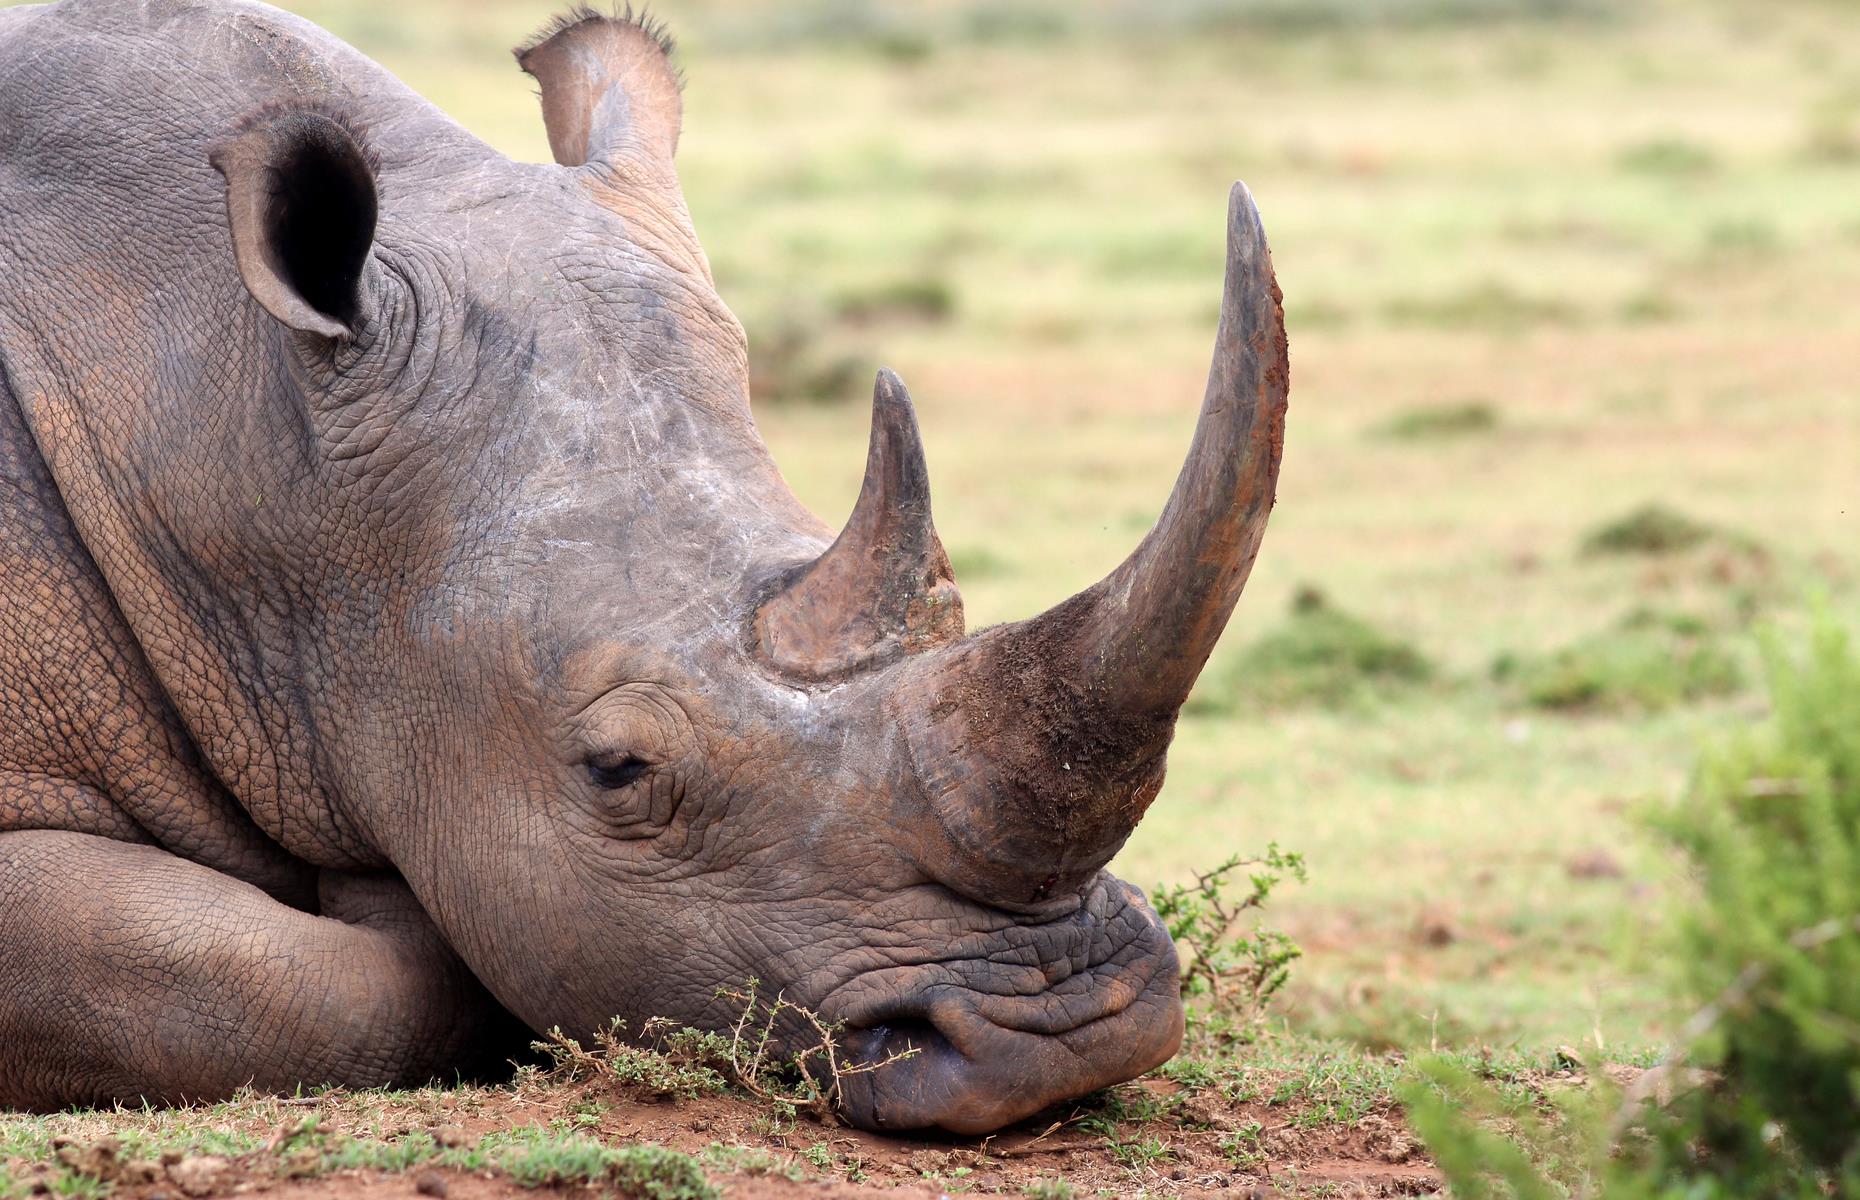 Calls for the rhino horn stockpile to be destroyed